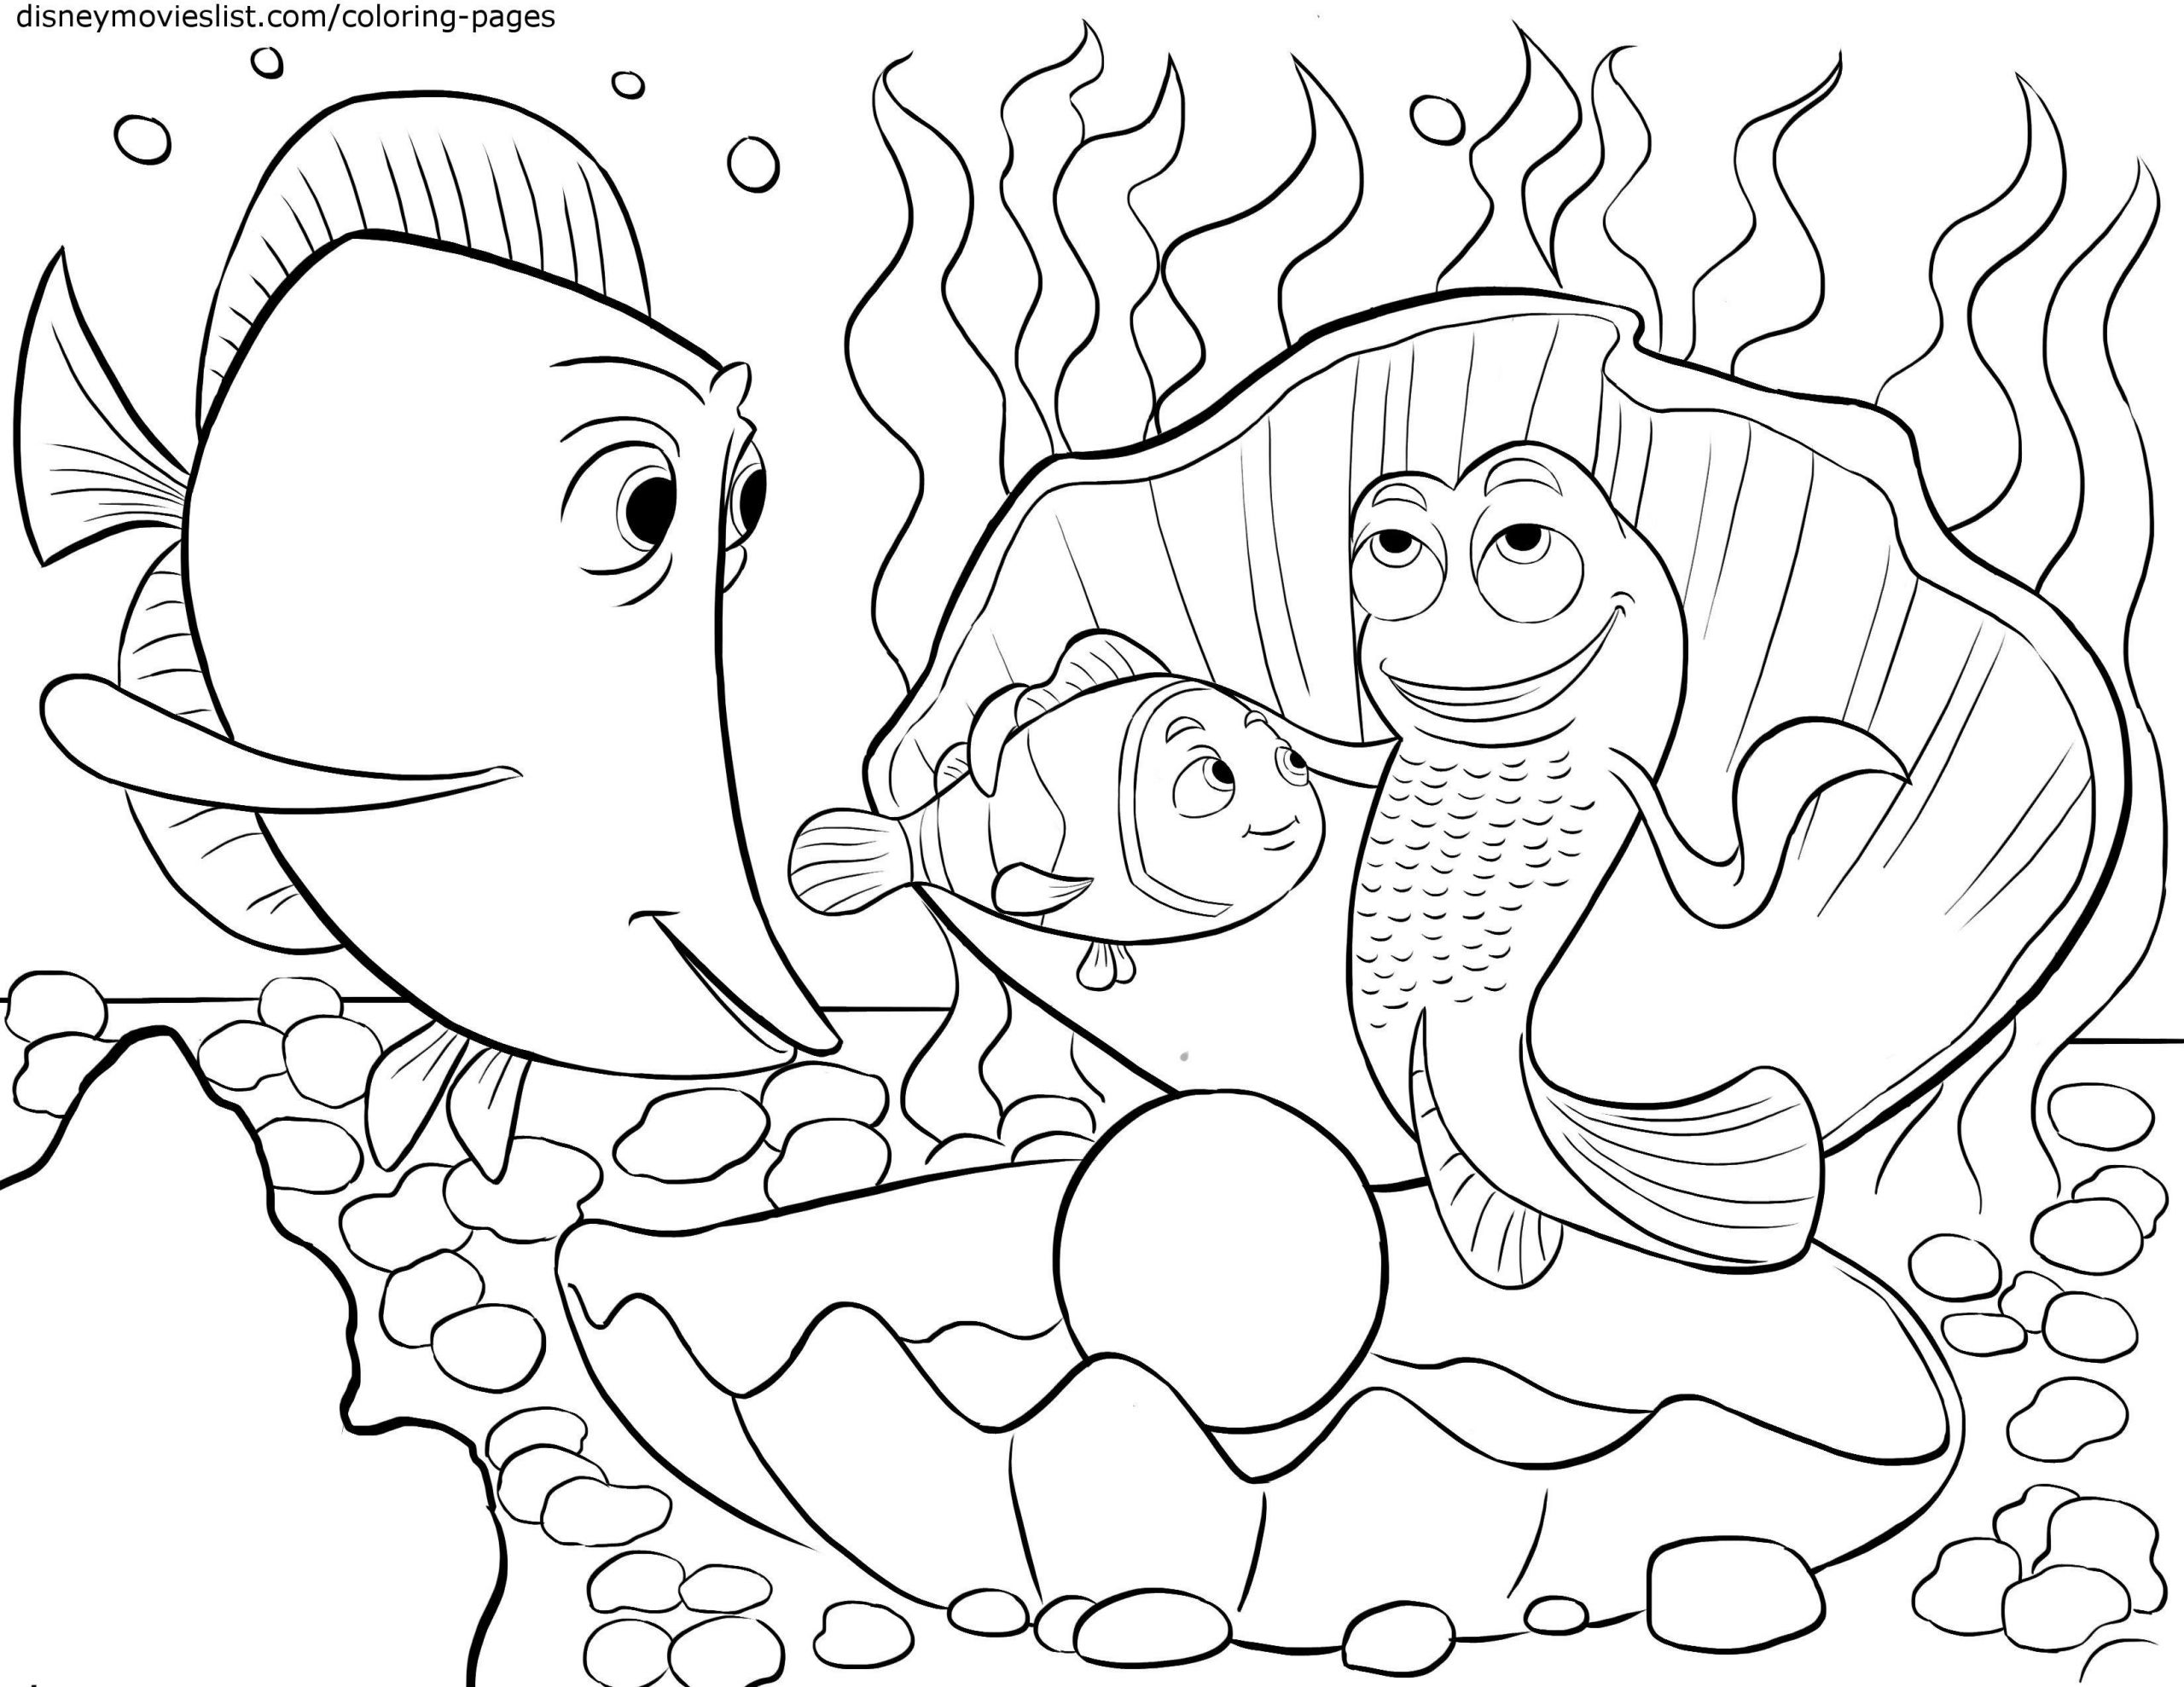 Coloring Pages For Toddlers Pdf
 Coloring Pages Marvellous Coloring Pages For Kids Pdf